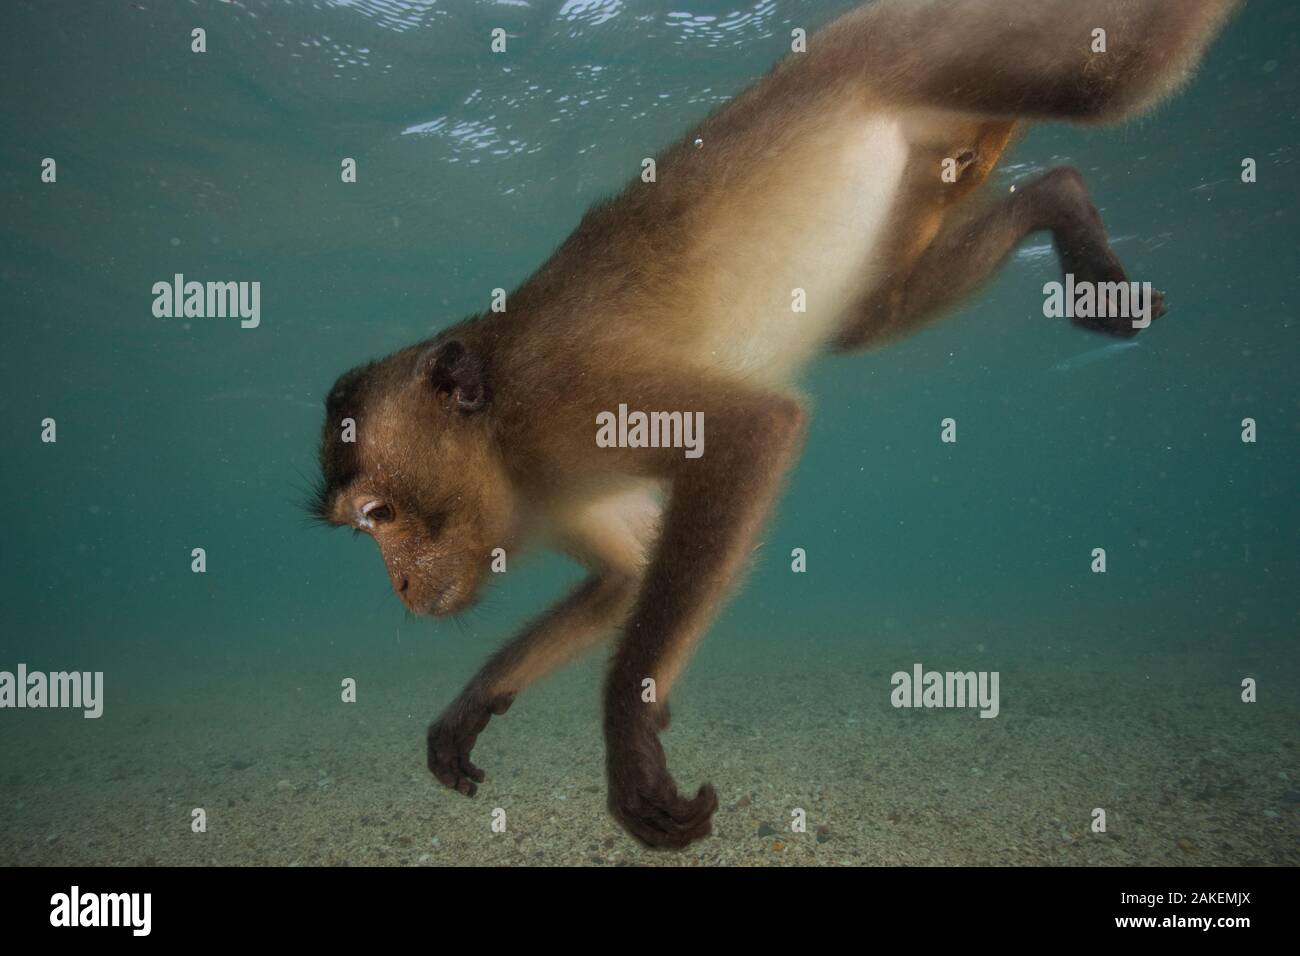 Long-tailed macaque (Macaca fascicularis) swimming. These macaques go underwater to play, or escape from a threat. When offering at temples are thrown into the water they swim and store it in their cheek pouches. Thailand. Stock Photo